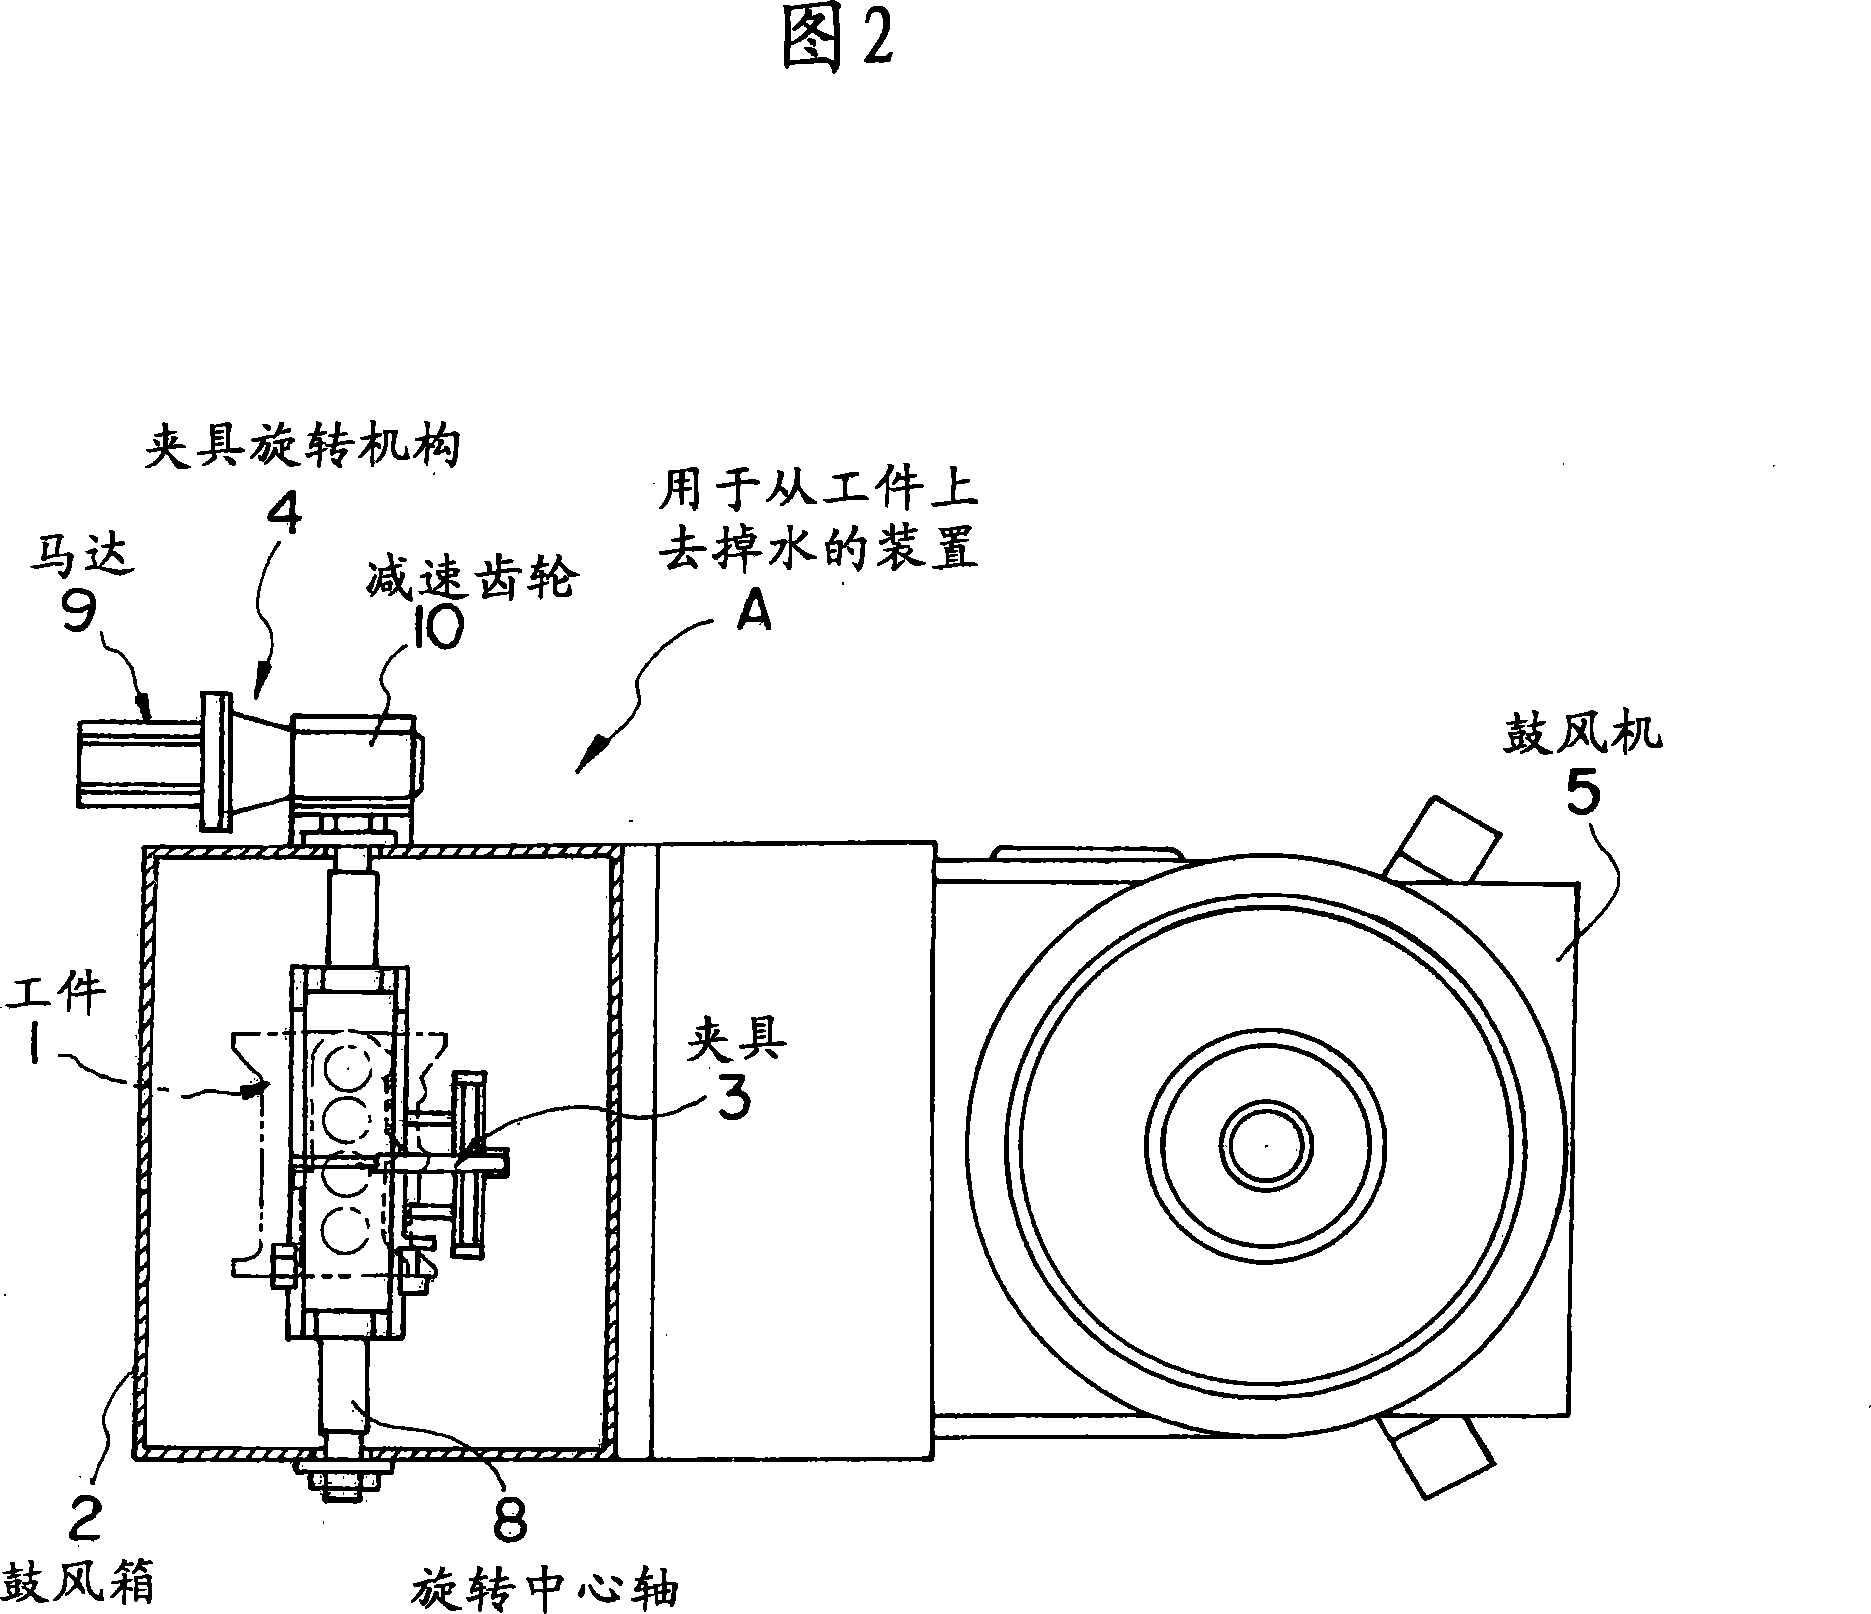 Device for removing water from a work-piece